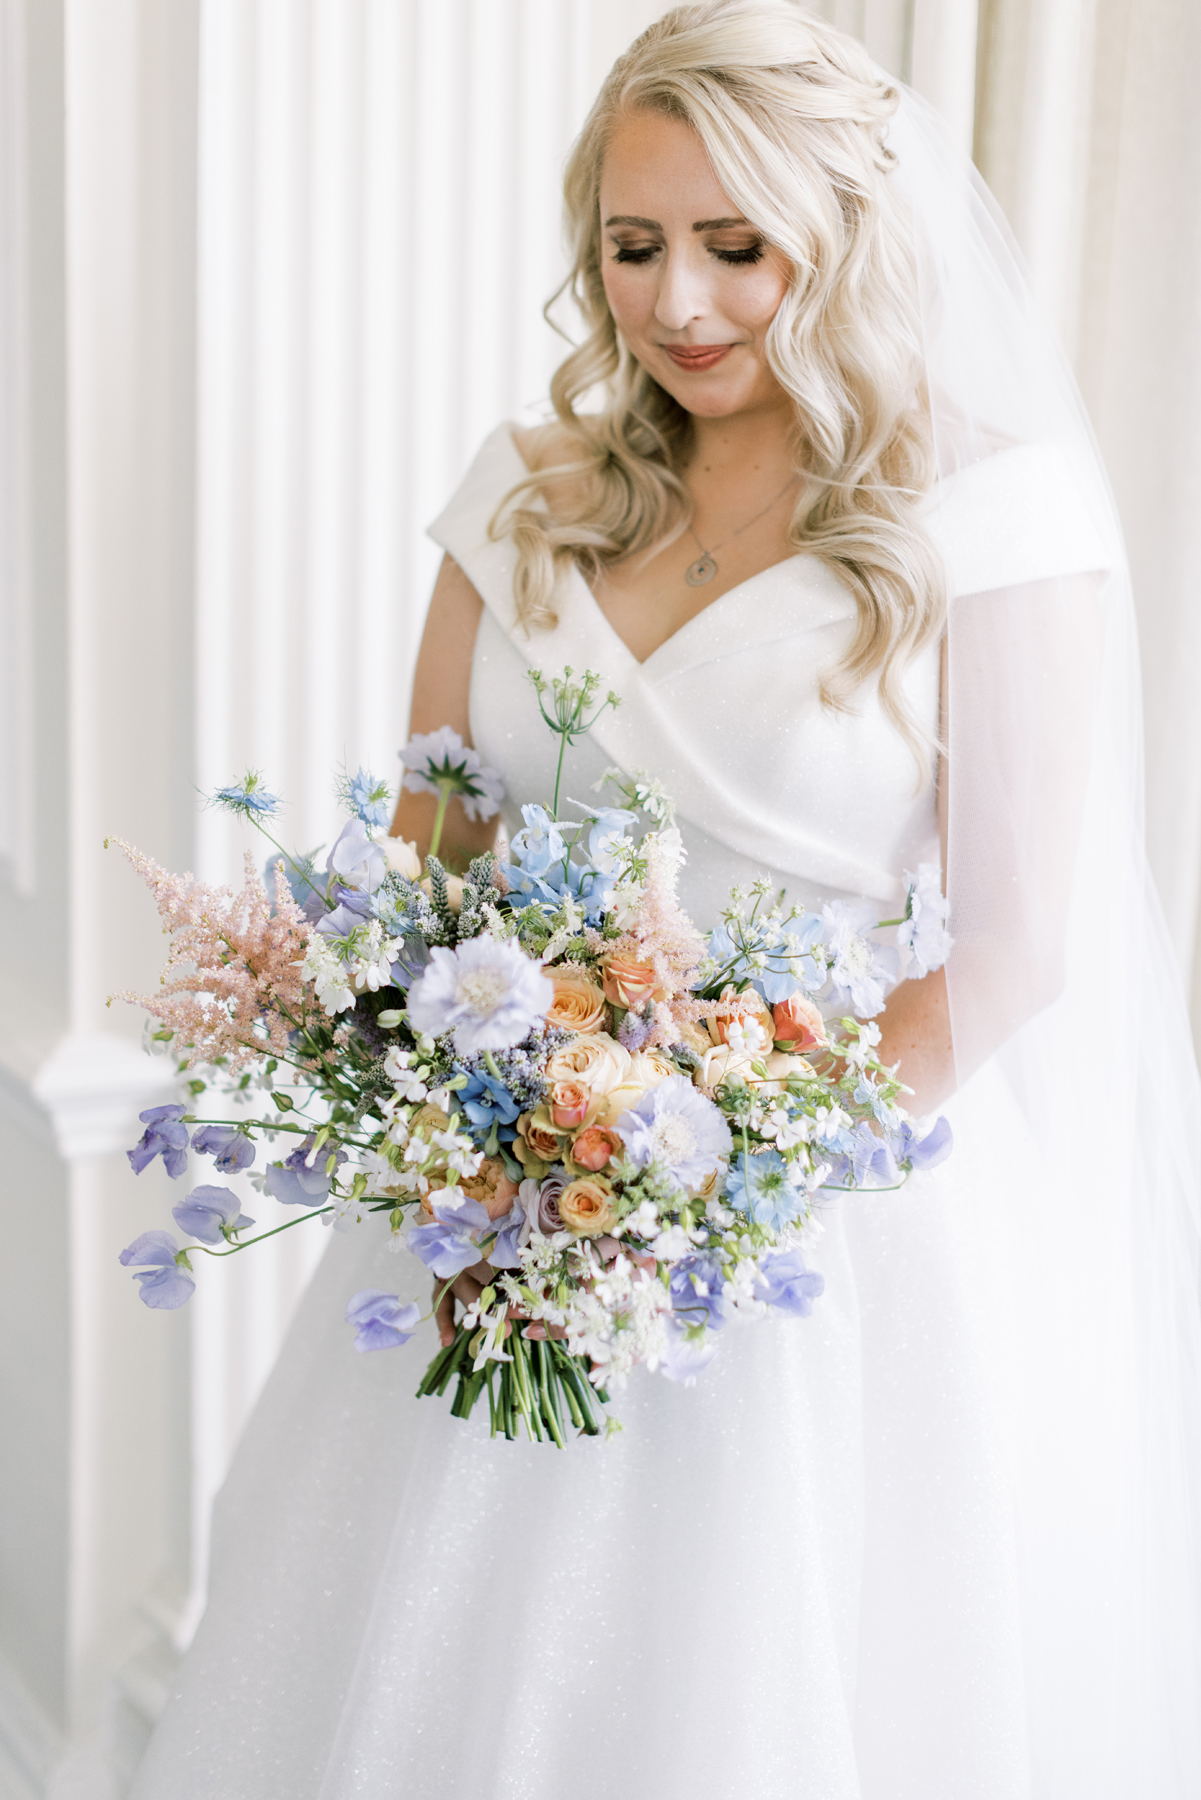 Hedsor House wedding Planner - bride looking down at bridal bouquet